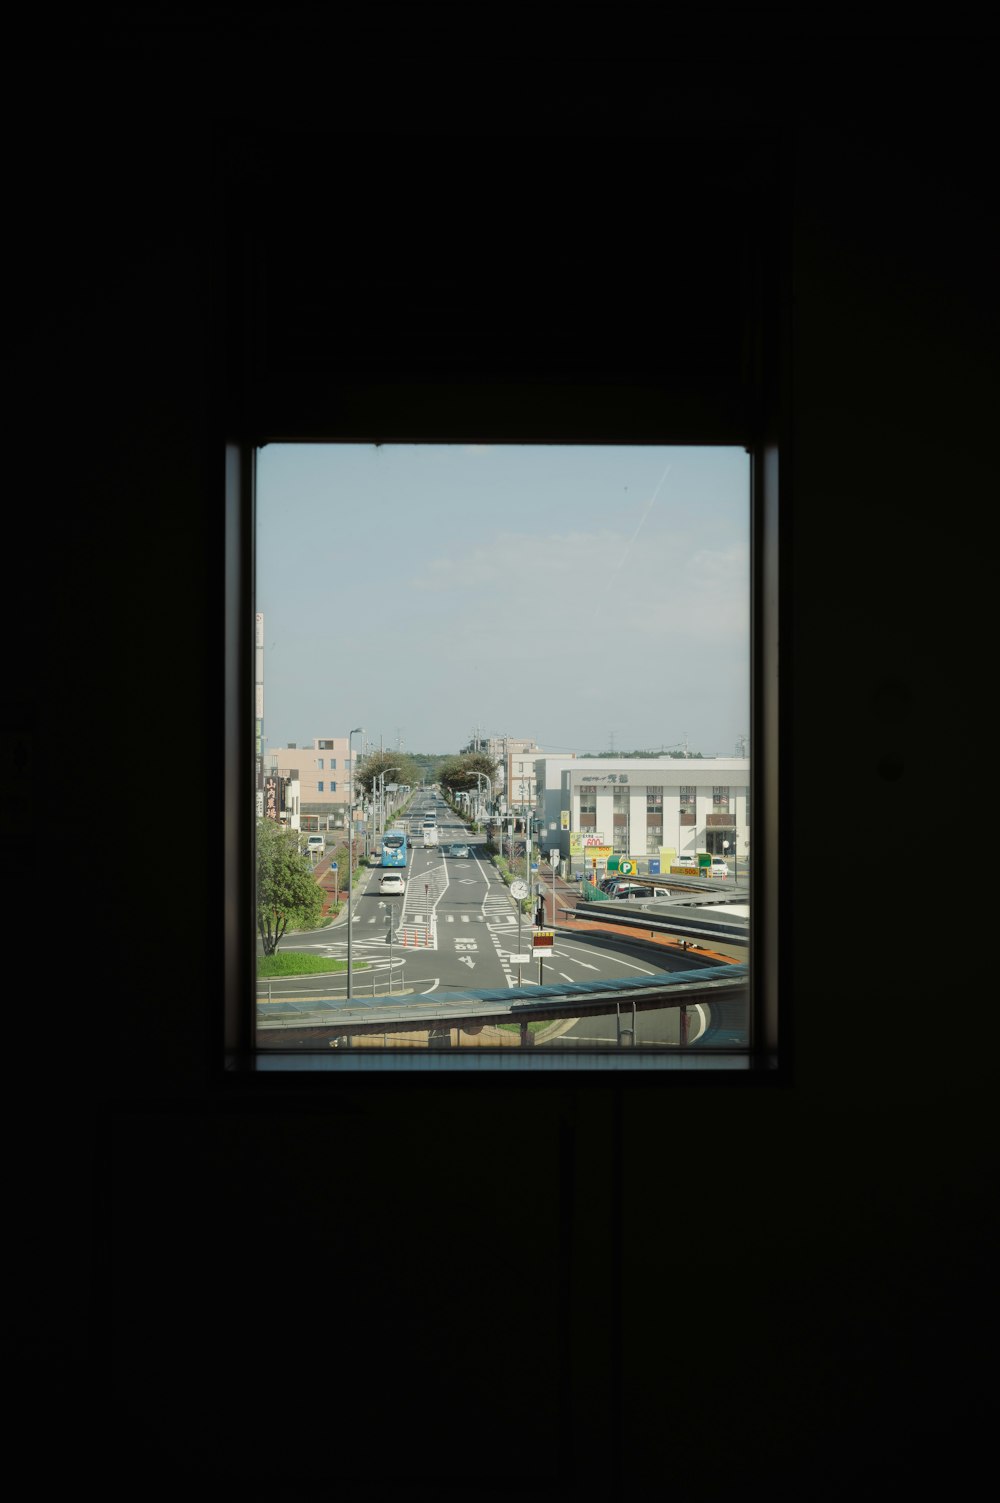 a view of a street from a window in a building